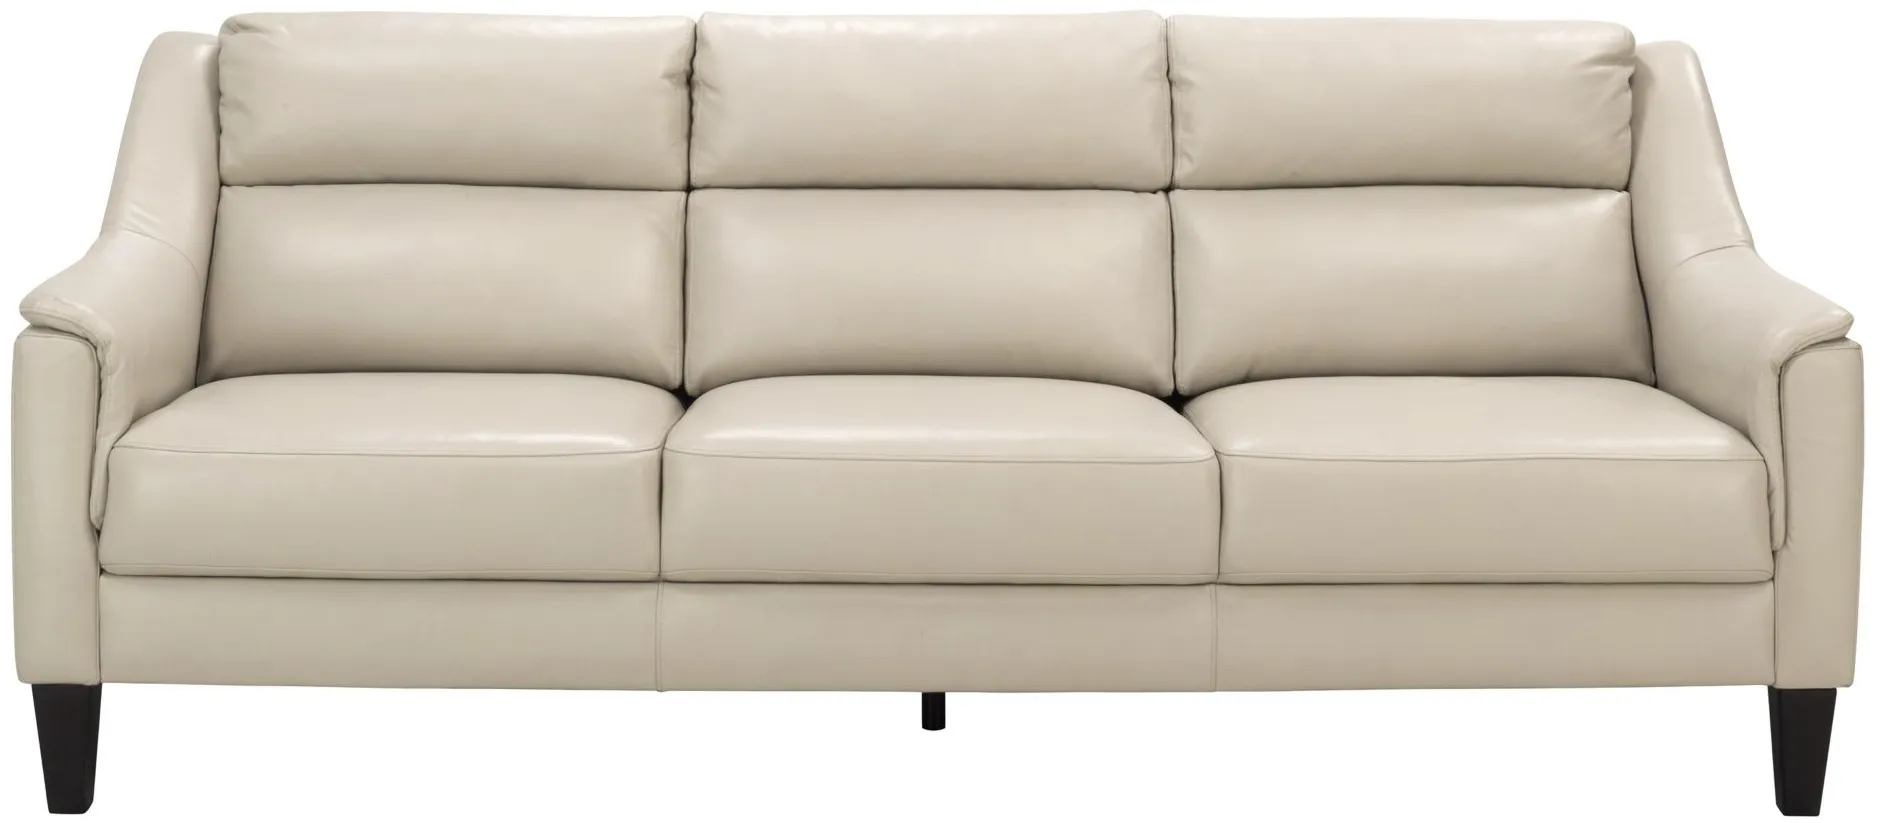 Rowen Sofa in Ivory by Chateau D'Ax